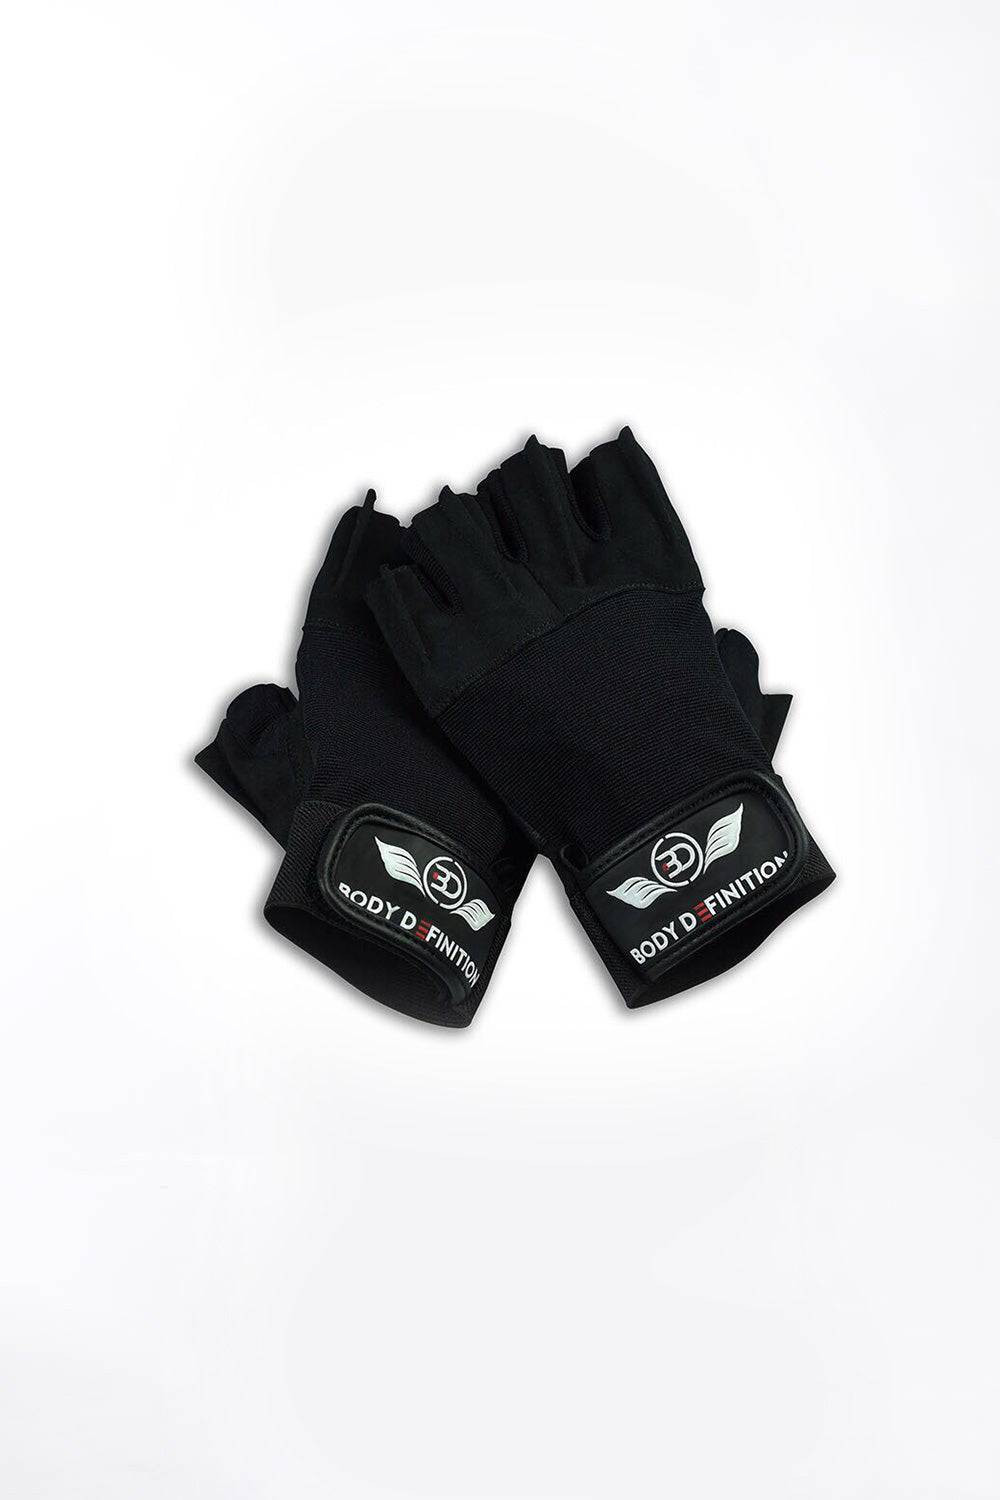 Mens Lifting Gloves With Short Straps ...